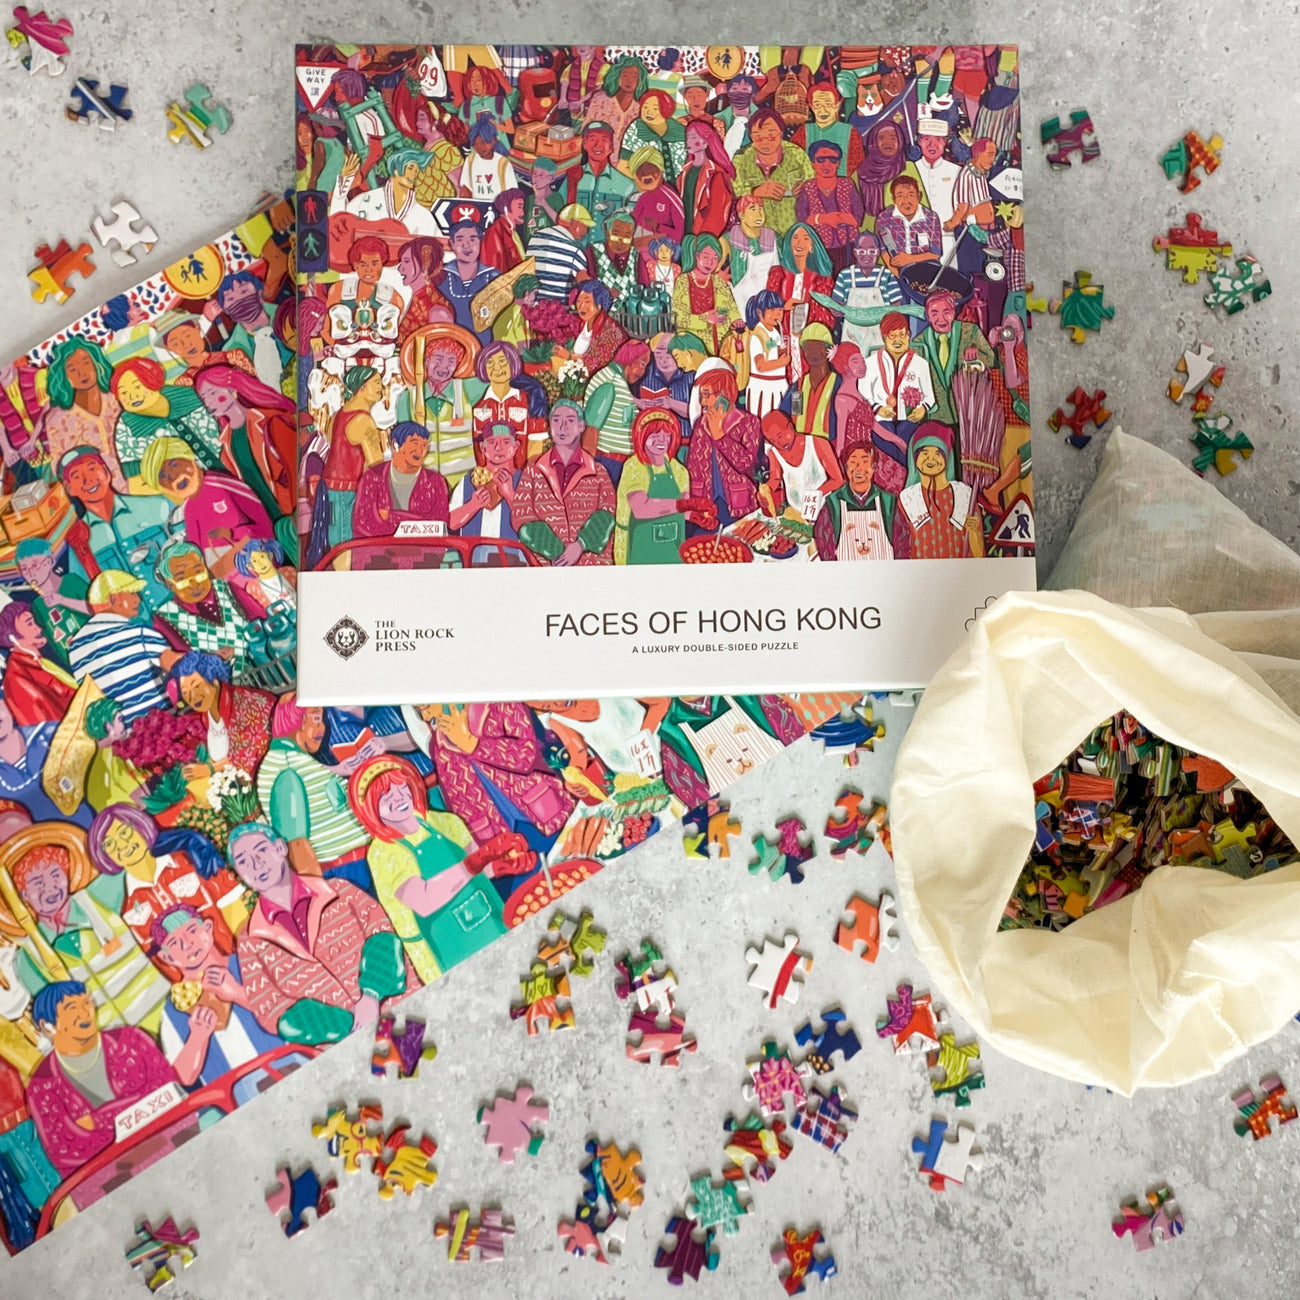 Faces of Hong Kong Double-sided 1000-pc Puzzle by Lion Rock Press